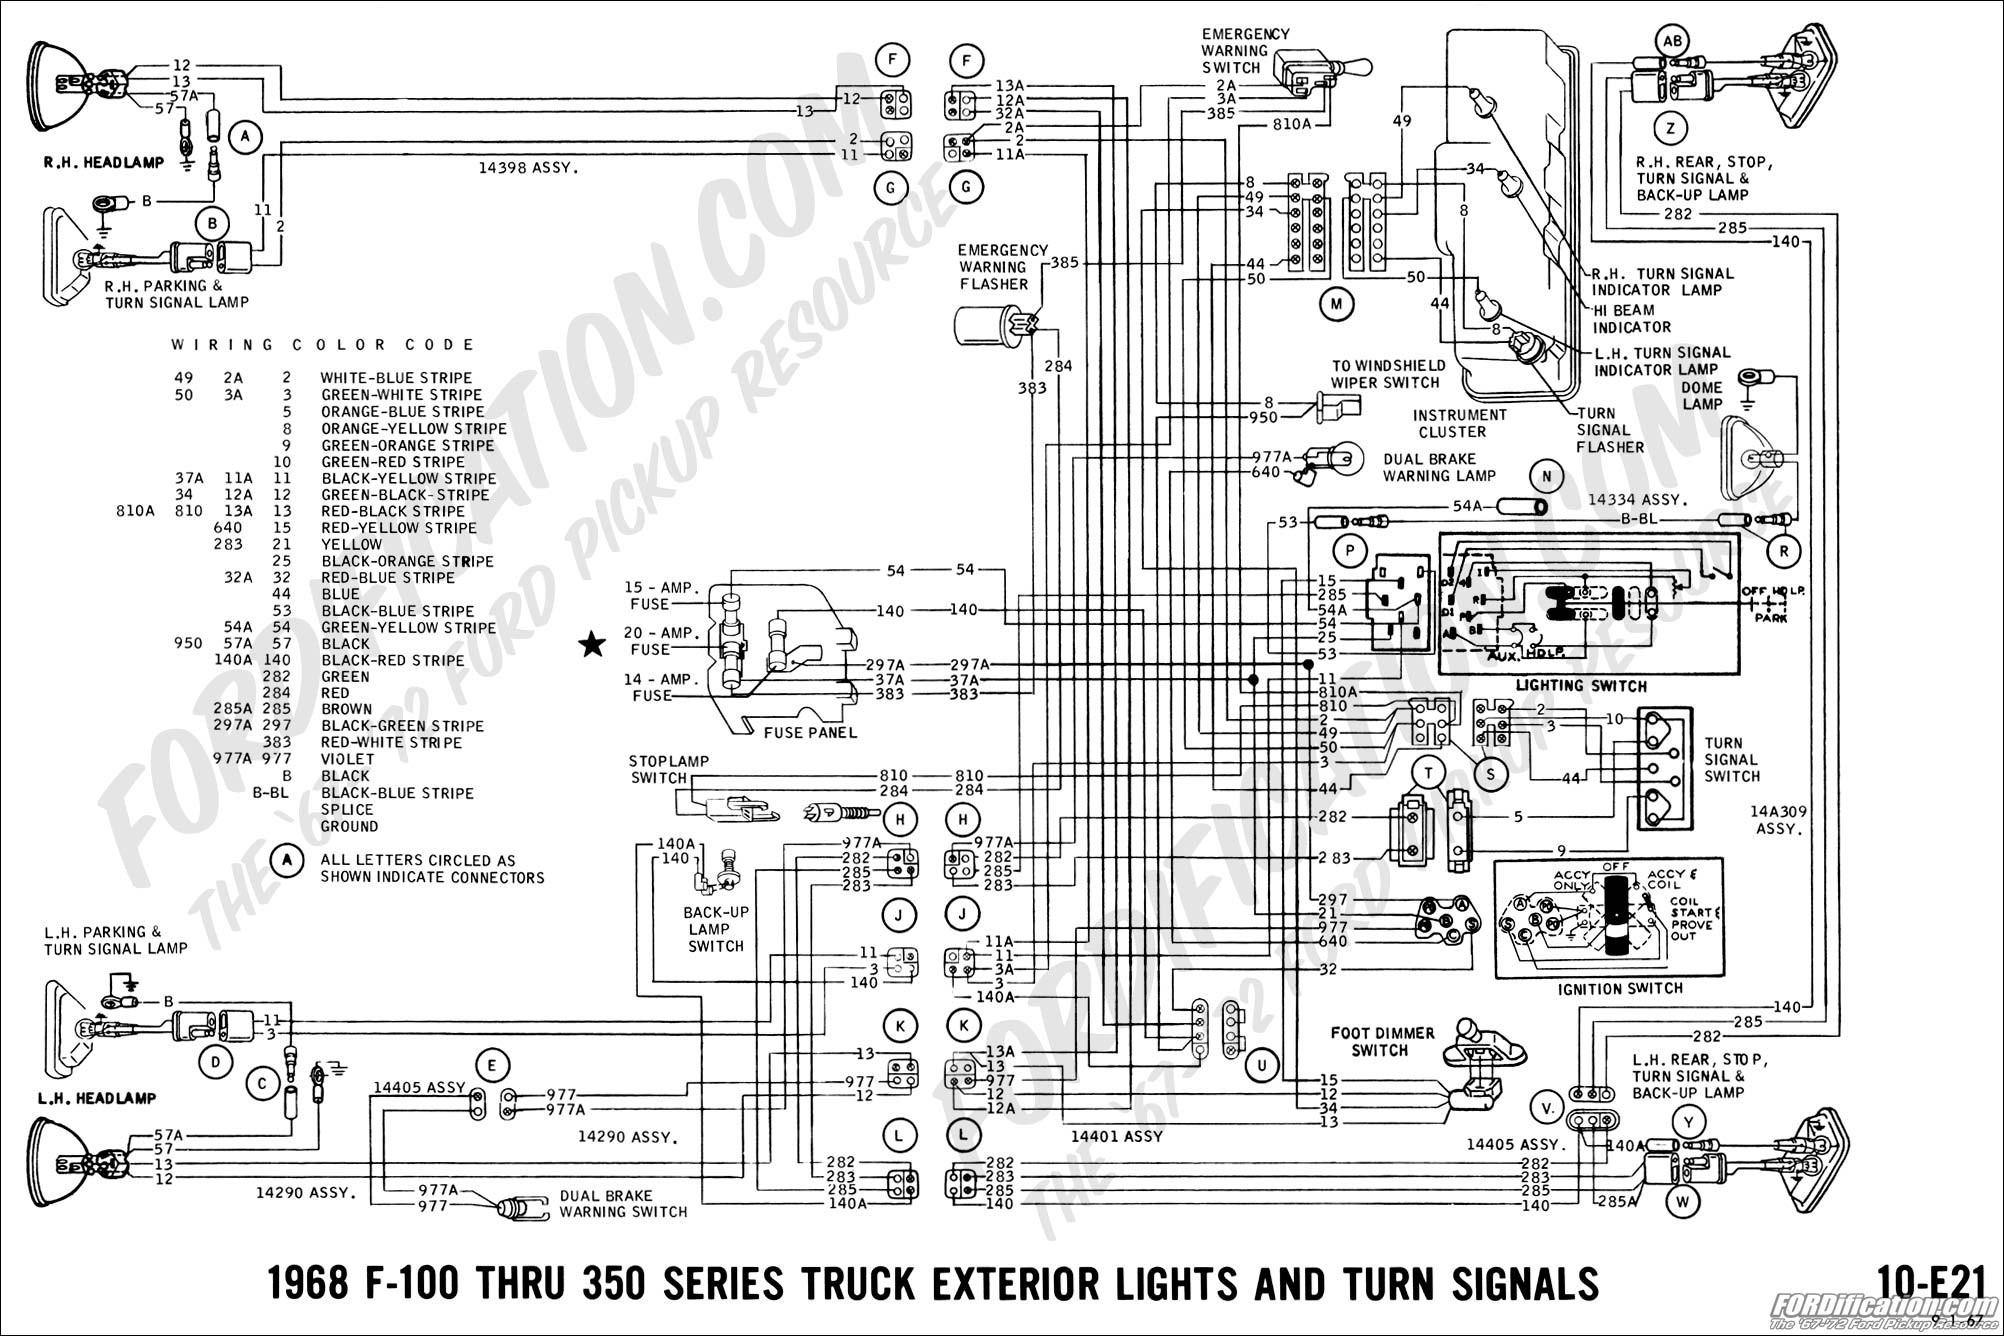 Signal Light Flasher Wiring Diagram ford Truck Technical Drawings and Schematics Section H Wiring Of Signal Light Flasher Wiring Diagram